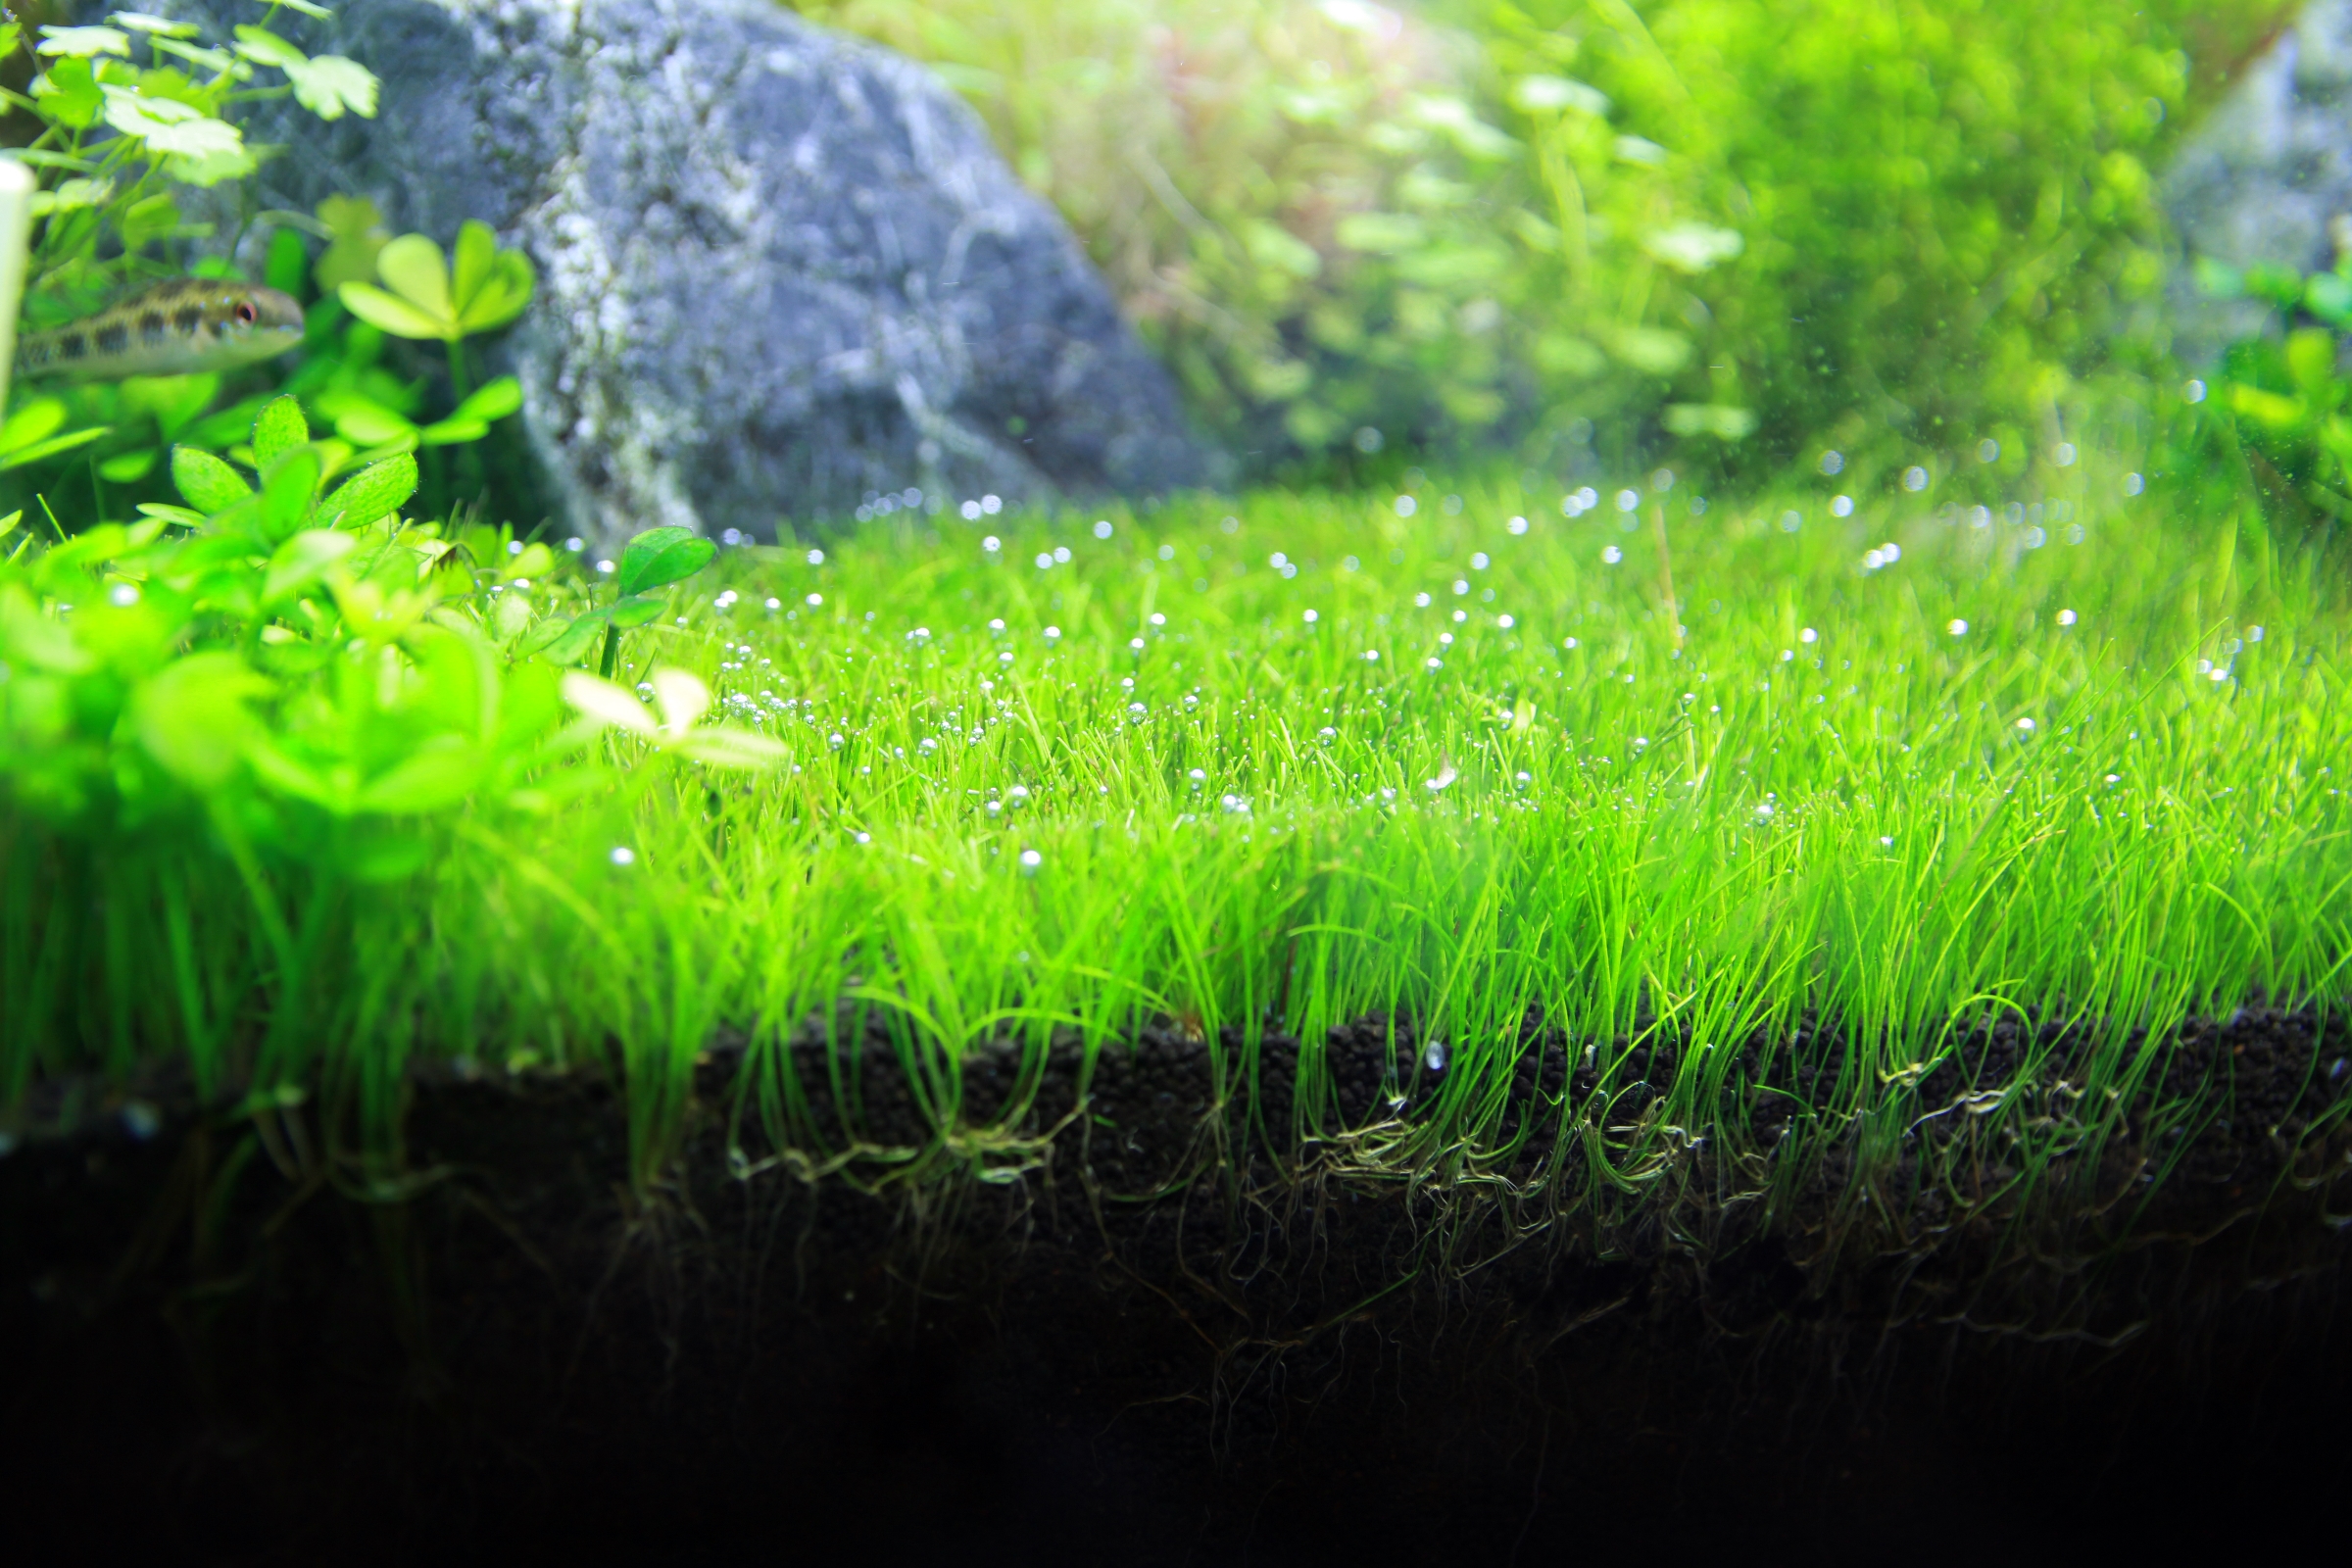 Aquatic plants "Dwarf Hairgrass", generating many beautiful bubbles of oxygen, with many bush plants, fish and rock in background, planted in fresh water, in 24 inch aqua tank.